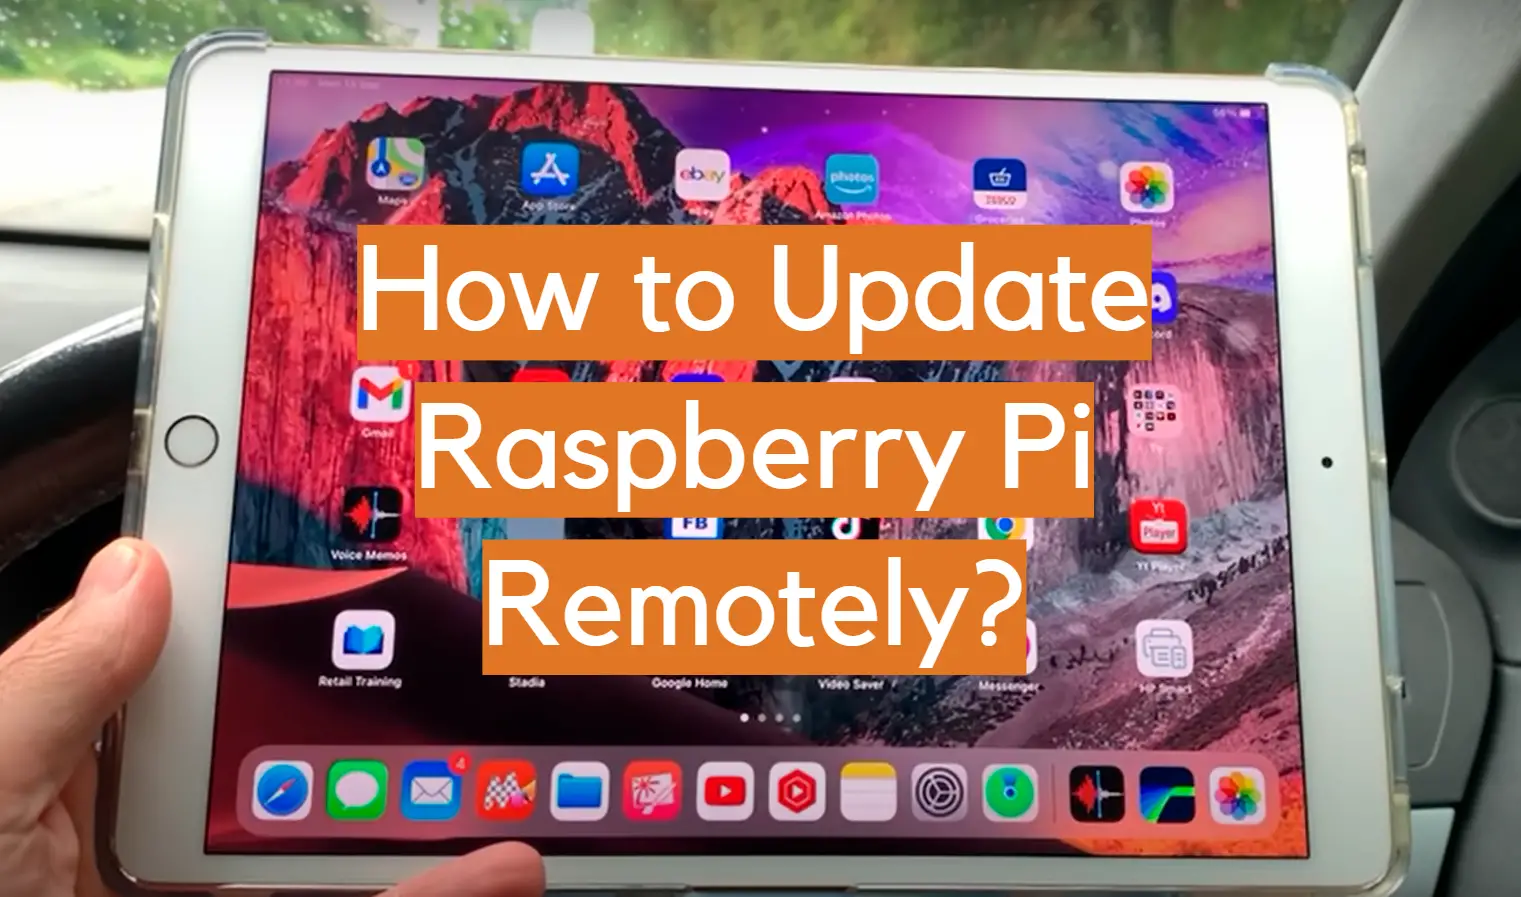 How to Update Raspberry Pi Remotely?